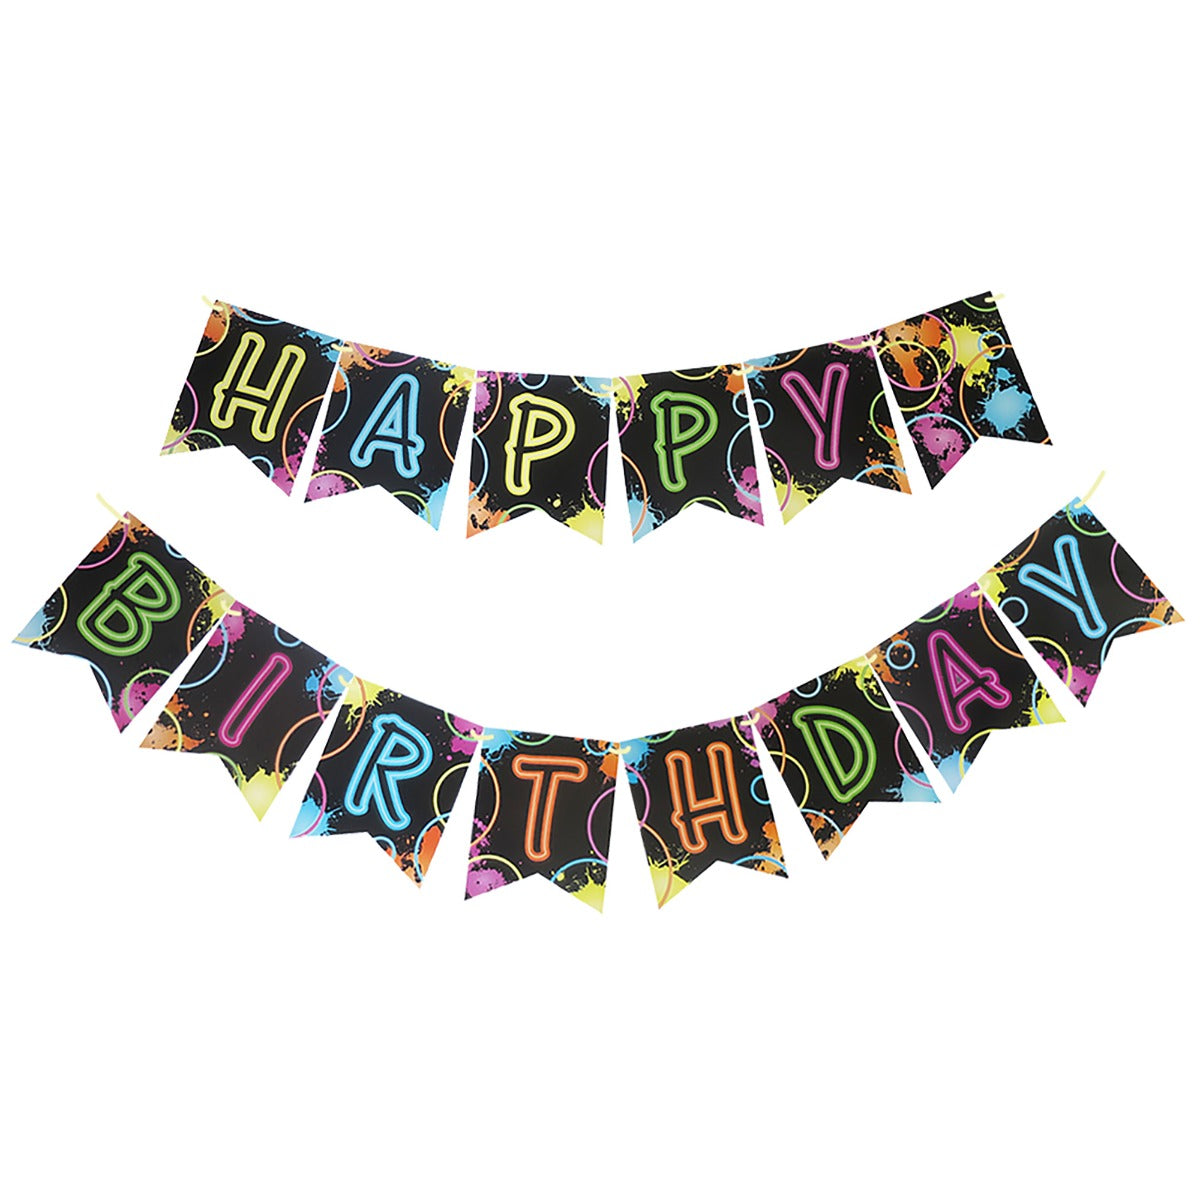 Image of the Happy Birthday Banner, perfect for any glow-in-the-dark or neon themed party. These birthday banner are made of high-quality paper and come in a pack of 1. The banner feature a vibrant glow-in-the-dark design that will add a fun and exciting touch to your party decor.